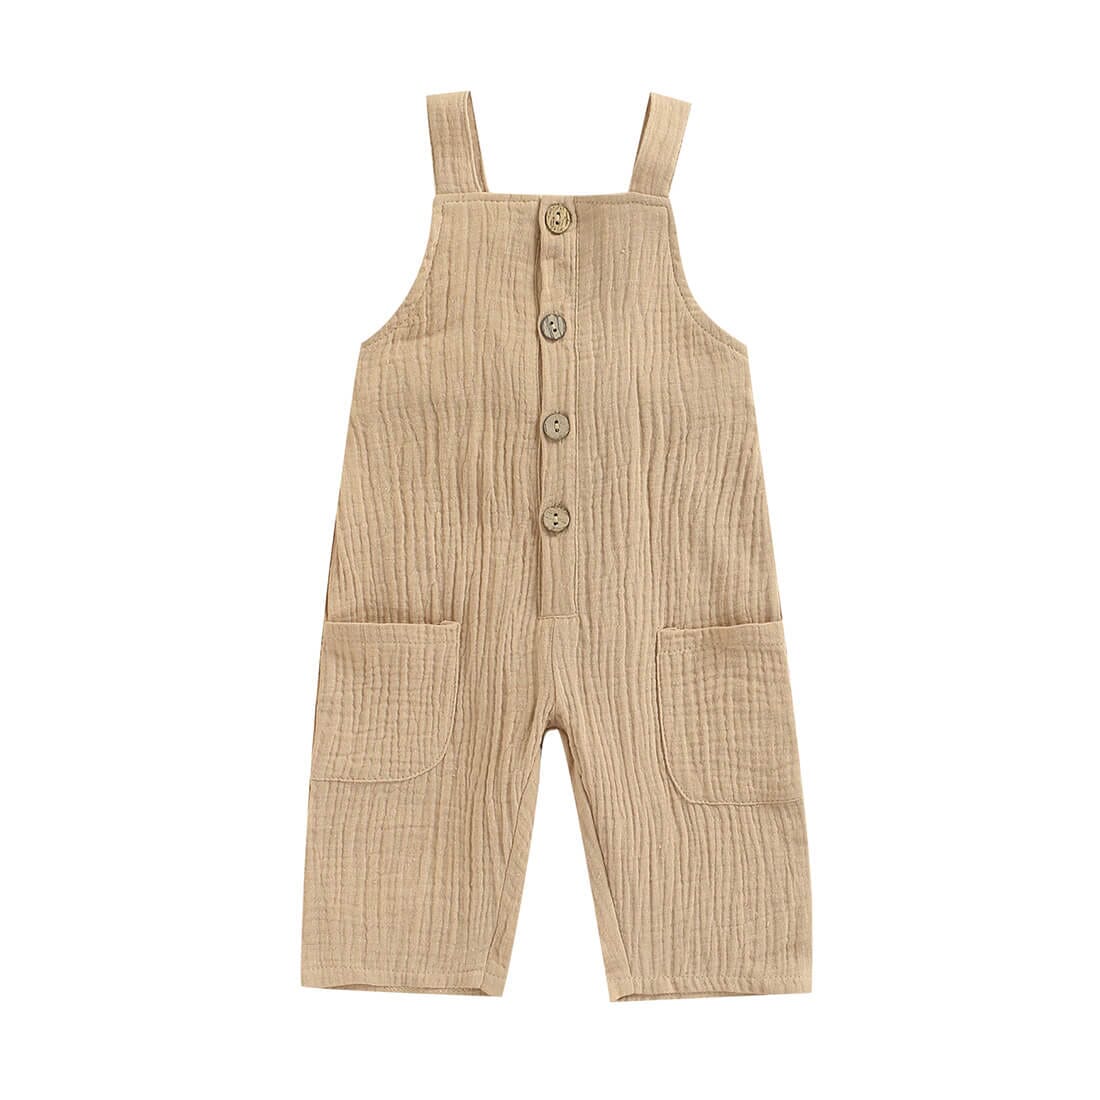 Sleeveless Muslin Solid Baby Jumpsuit Jumpsuit The Trendy Toddlers Khaki 18-24 M 